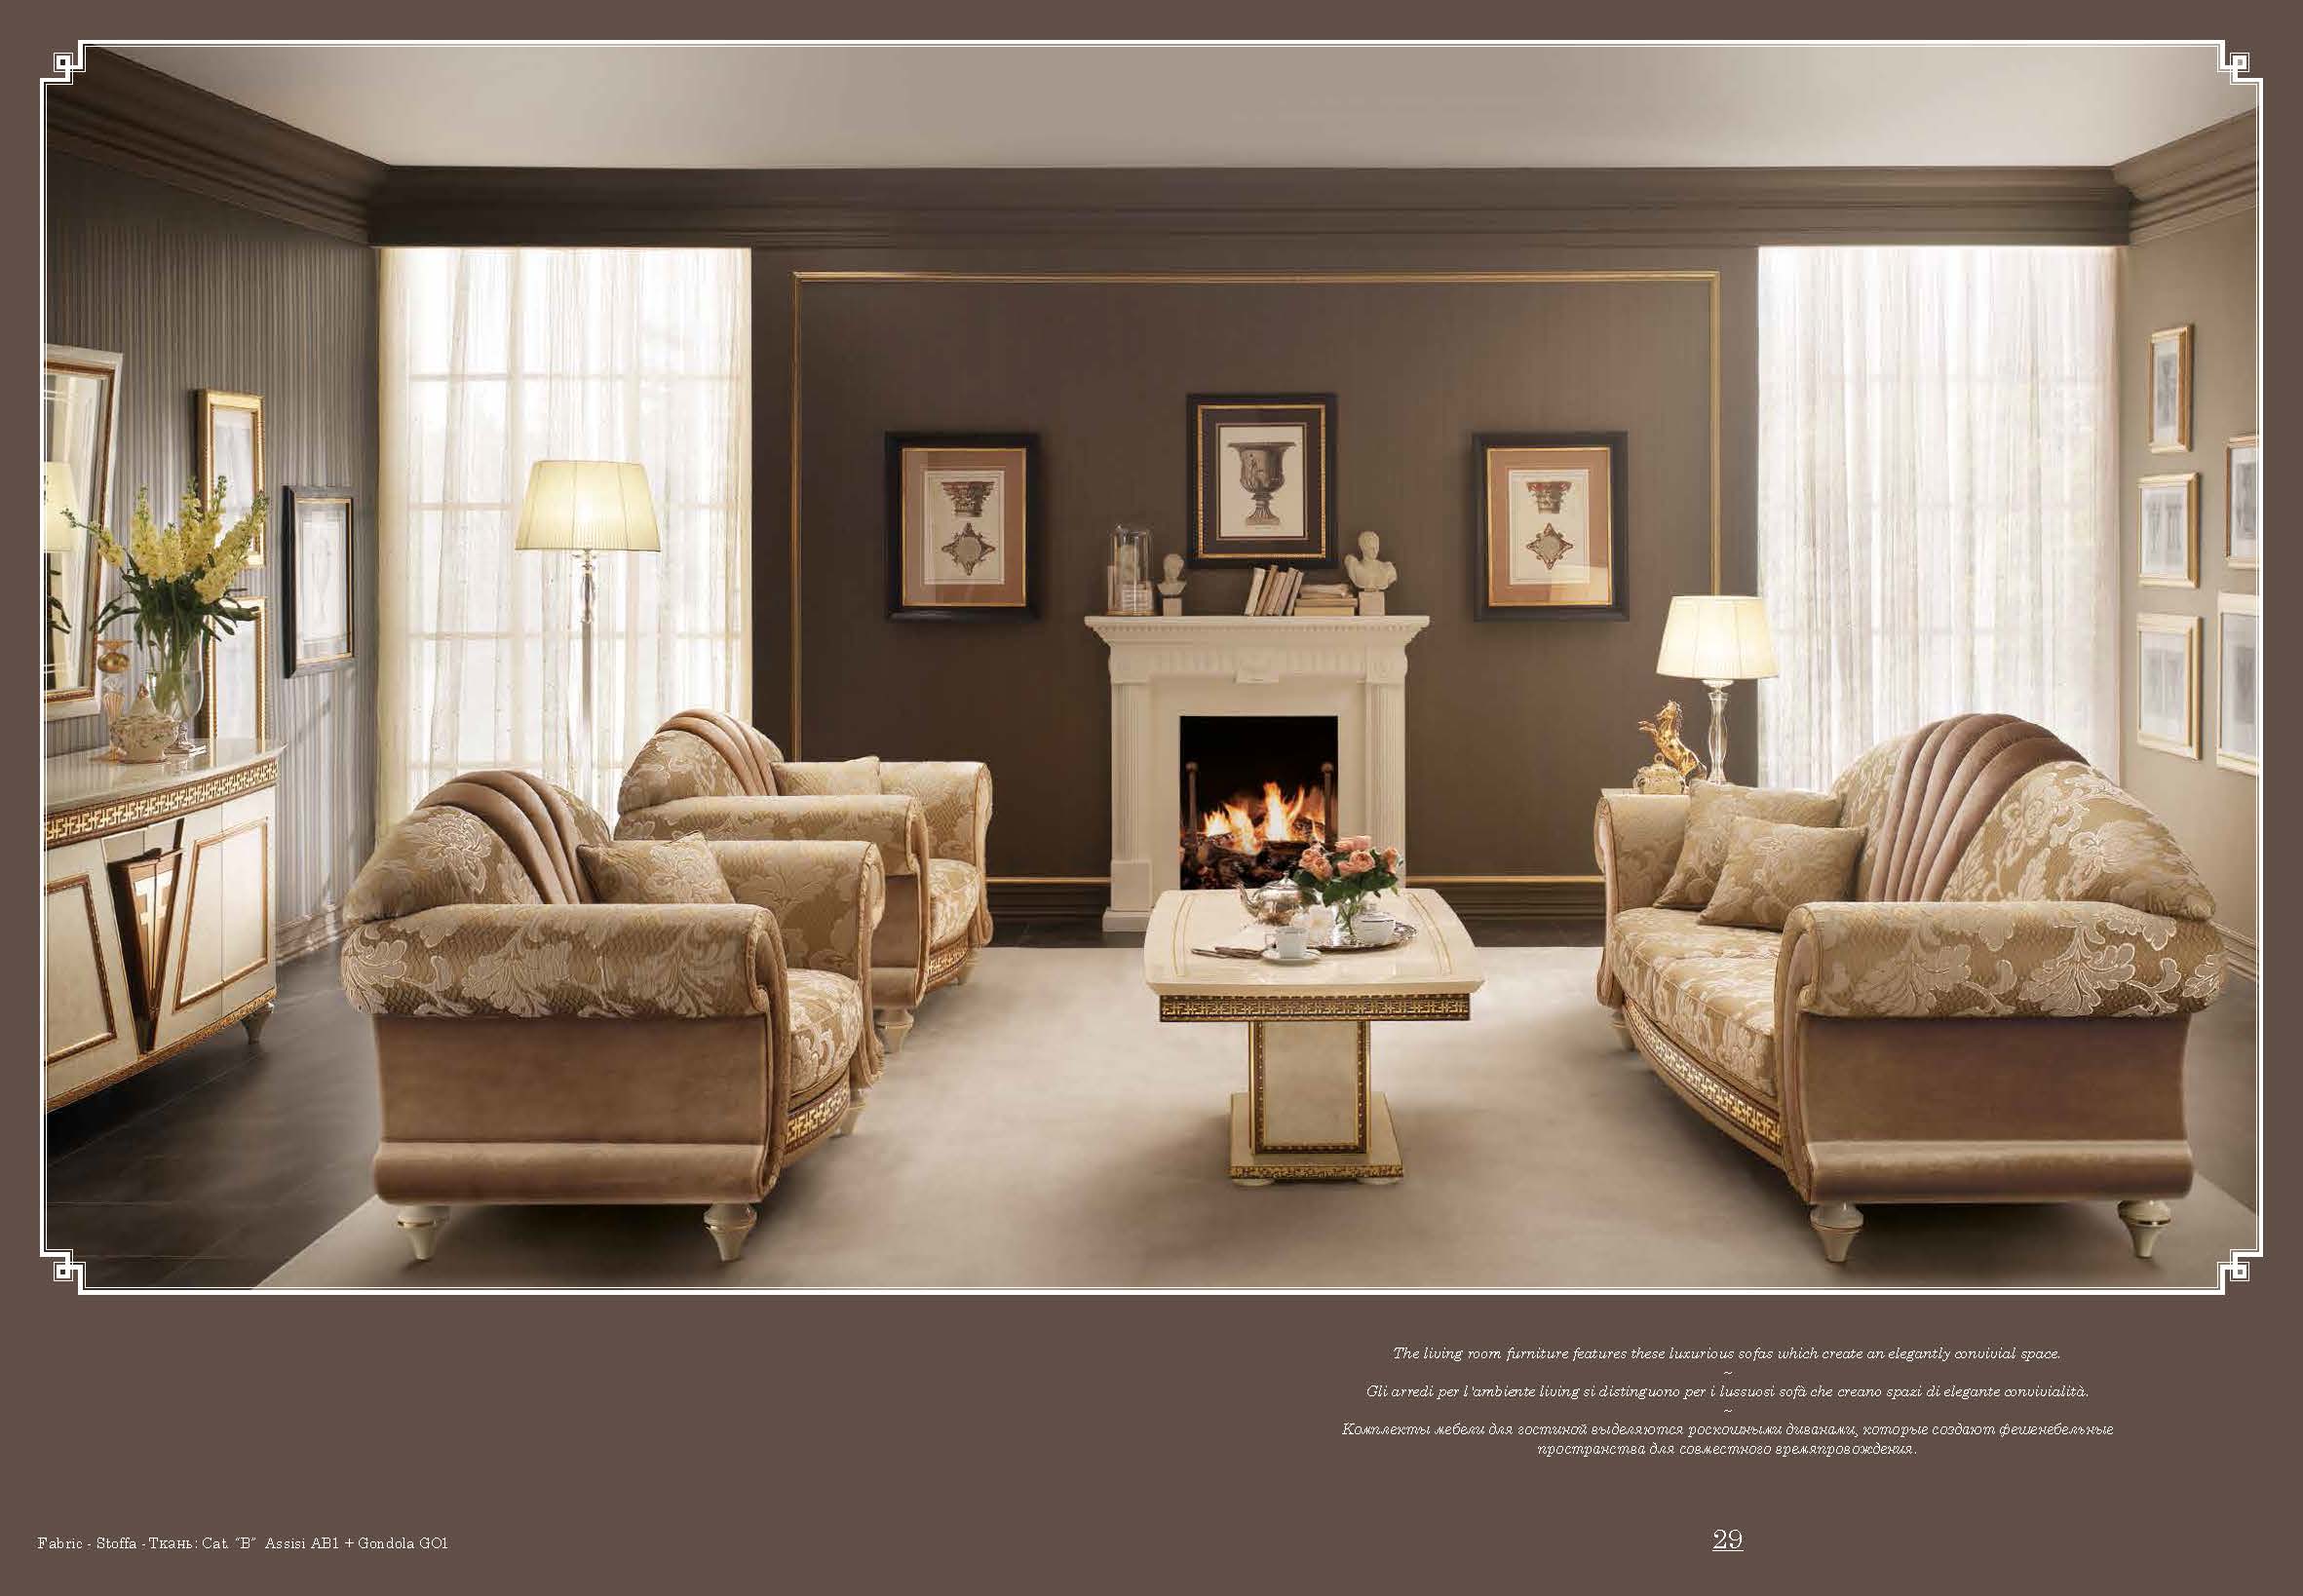 Living Room Furniture Sleepers Sofas Loveseats and Chairs Fantasia Living